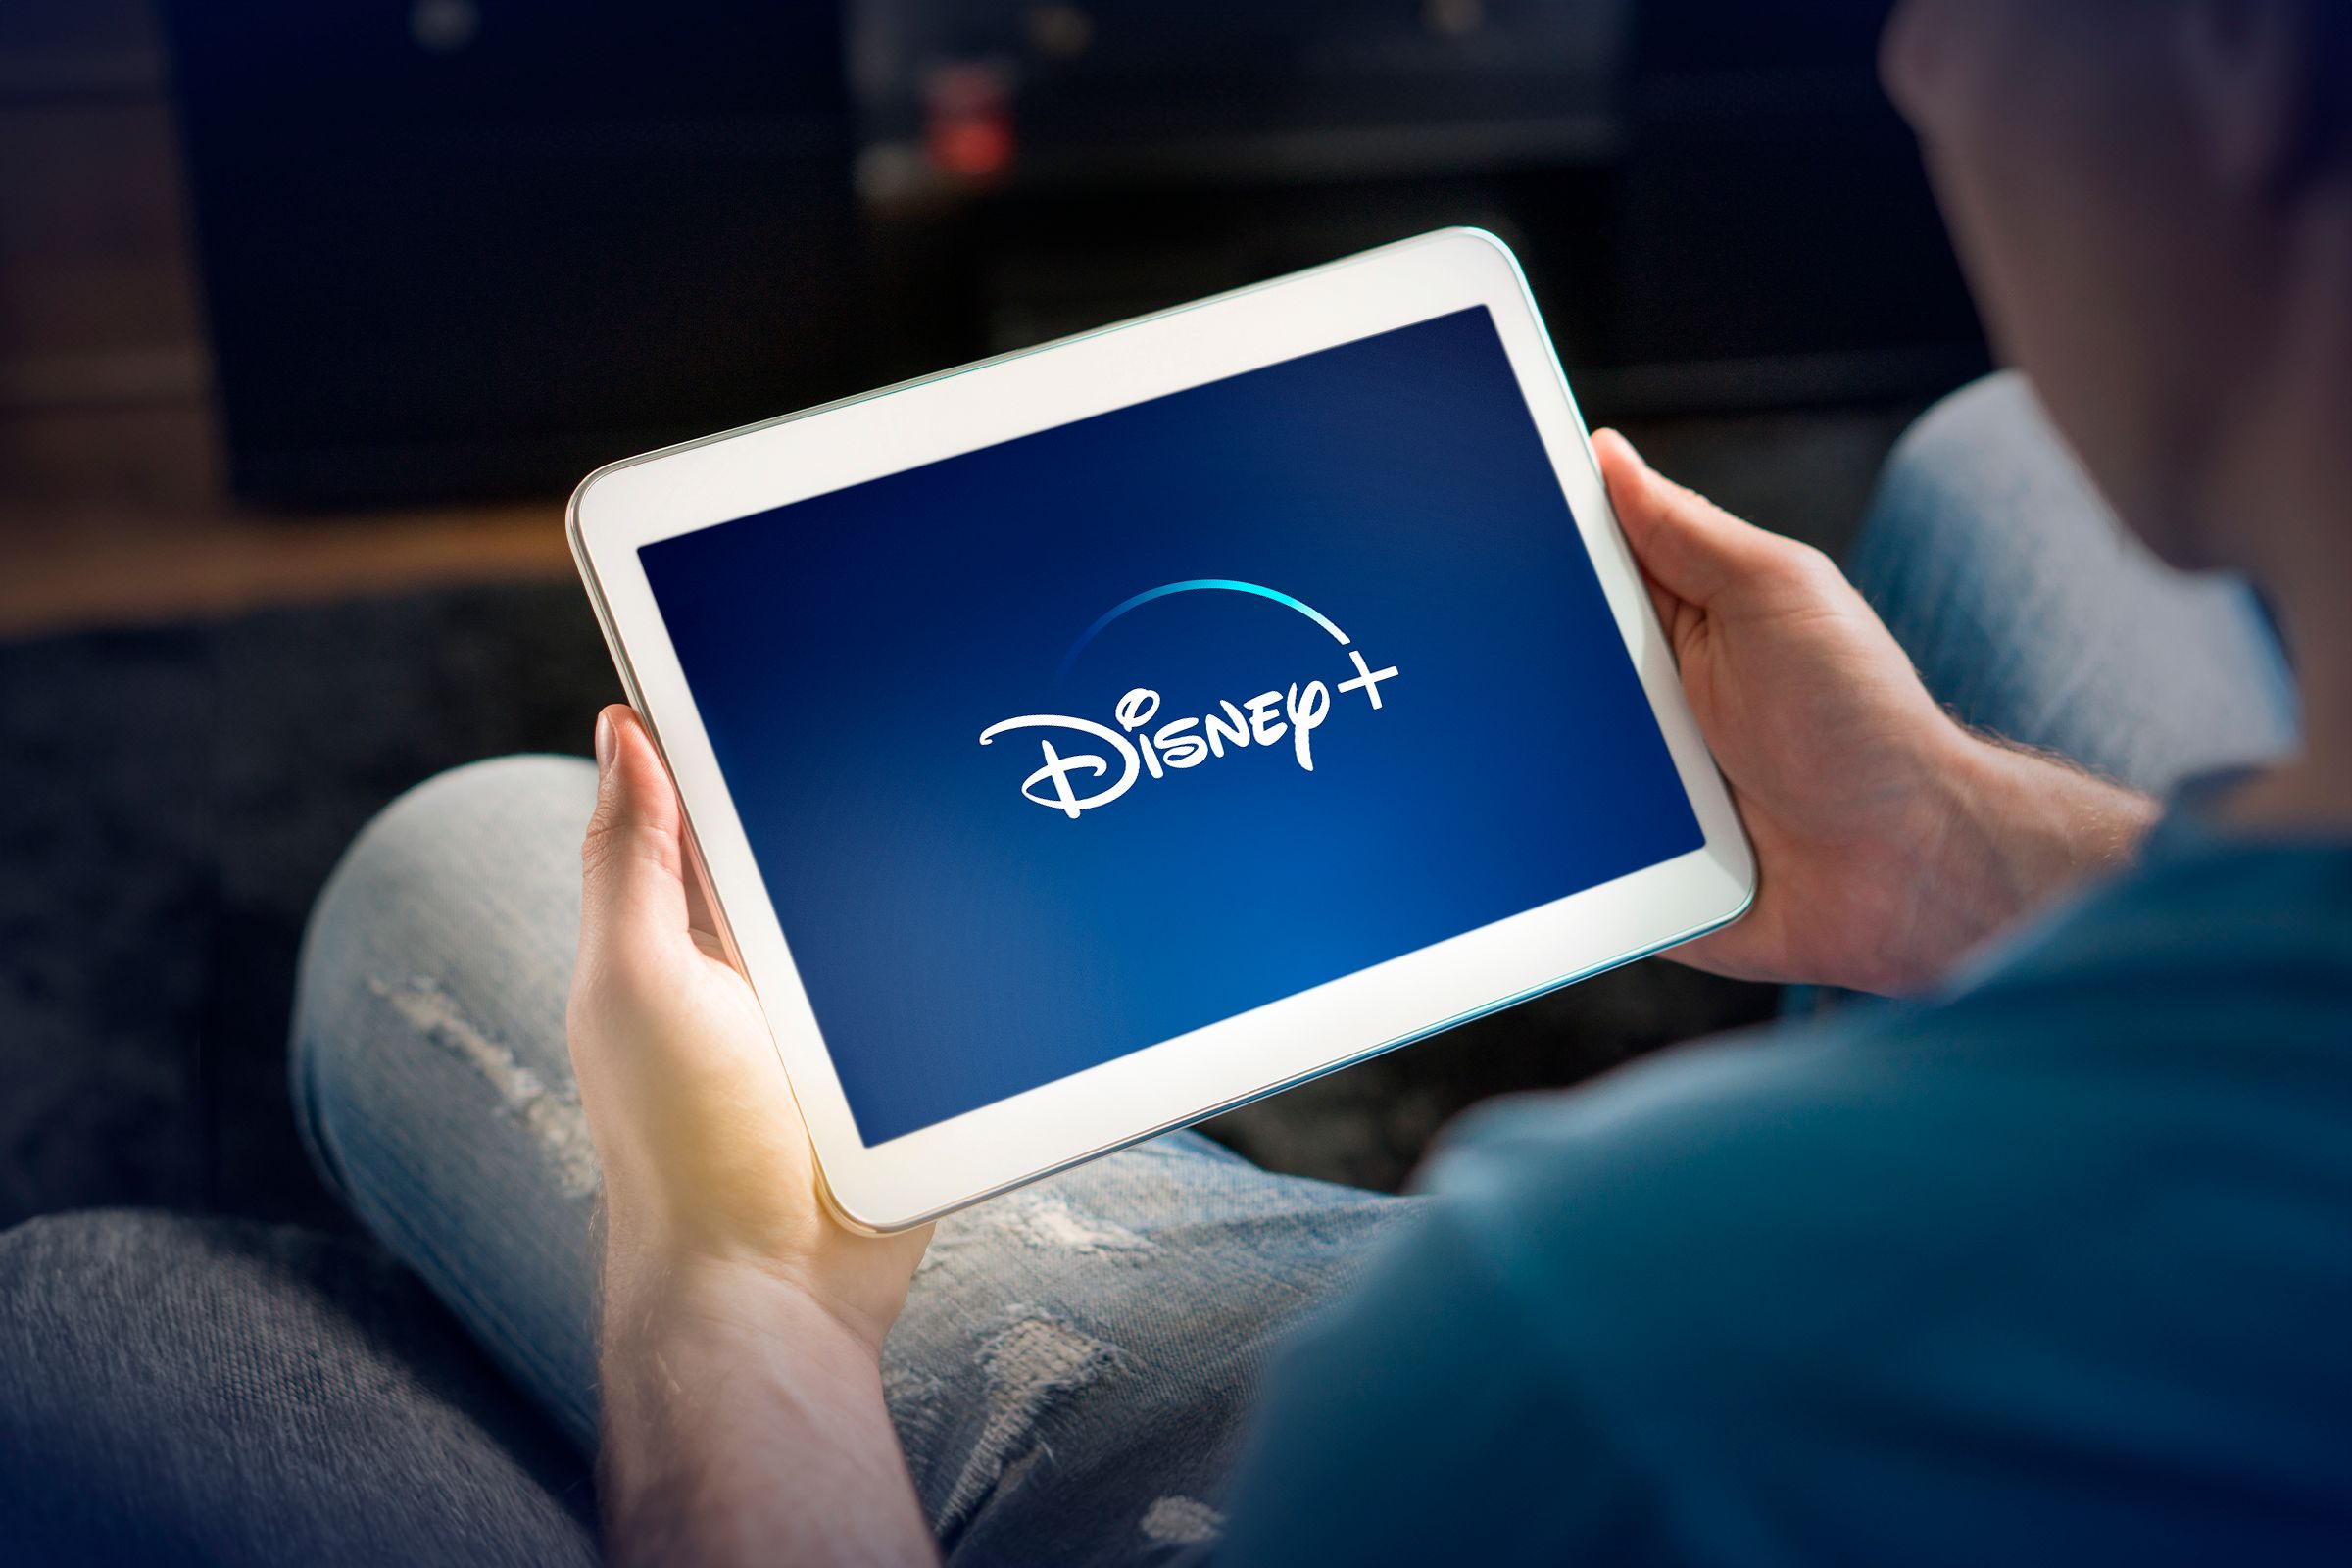 A man on a couch holding a white tablet with Disney+ logo on it.